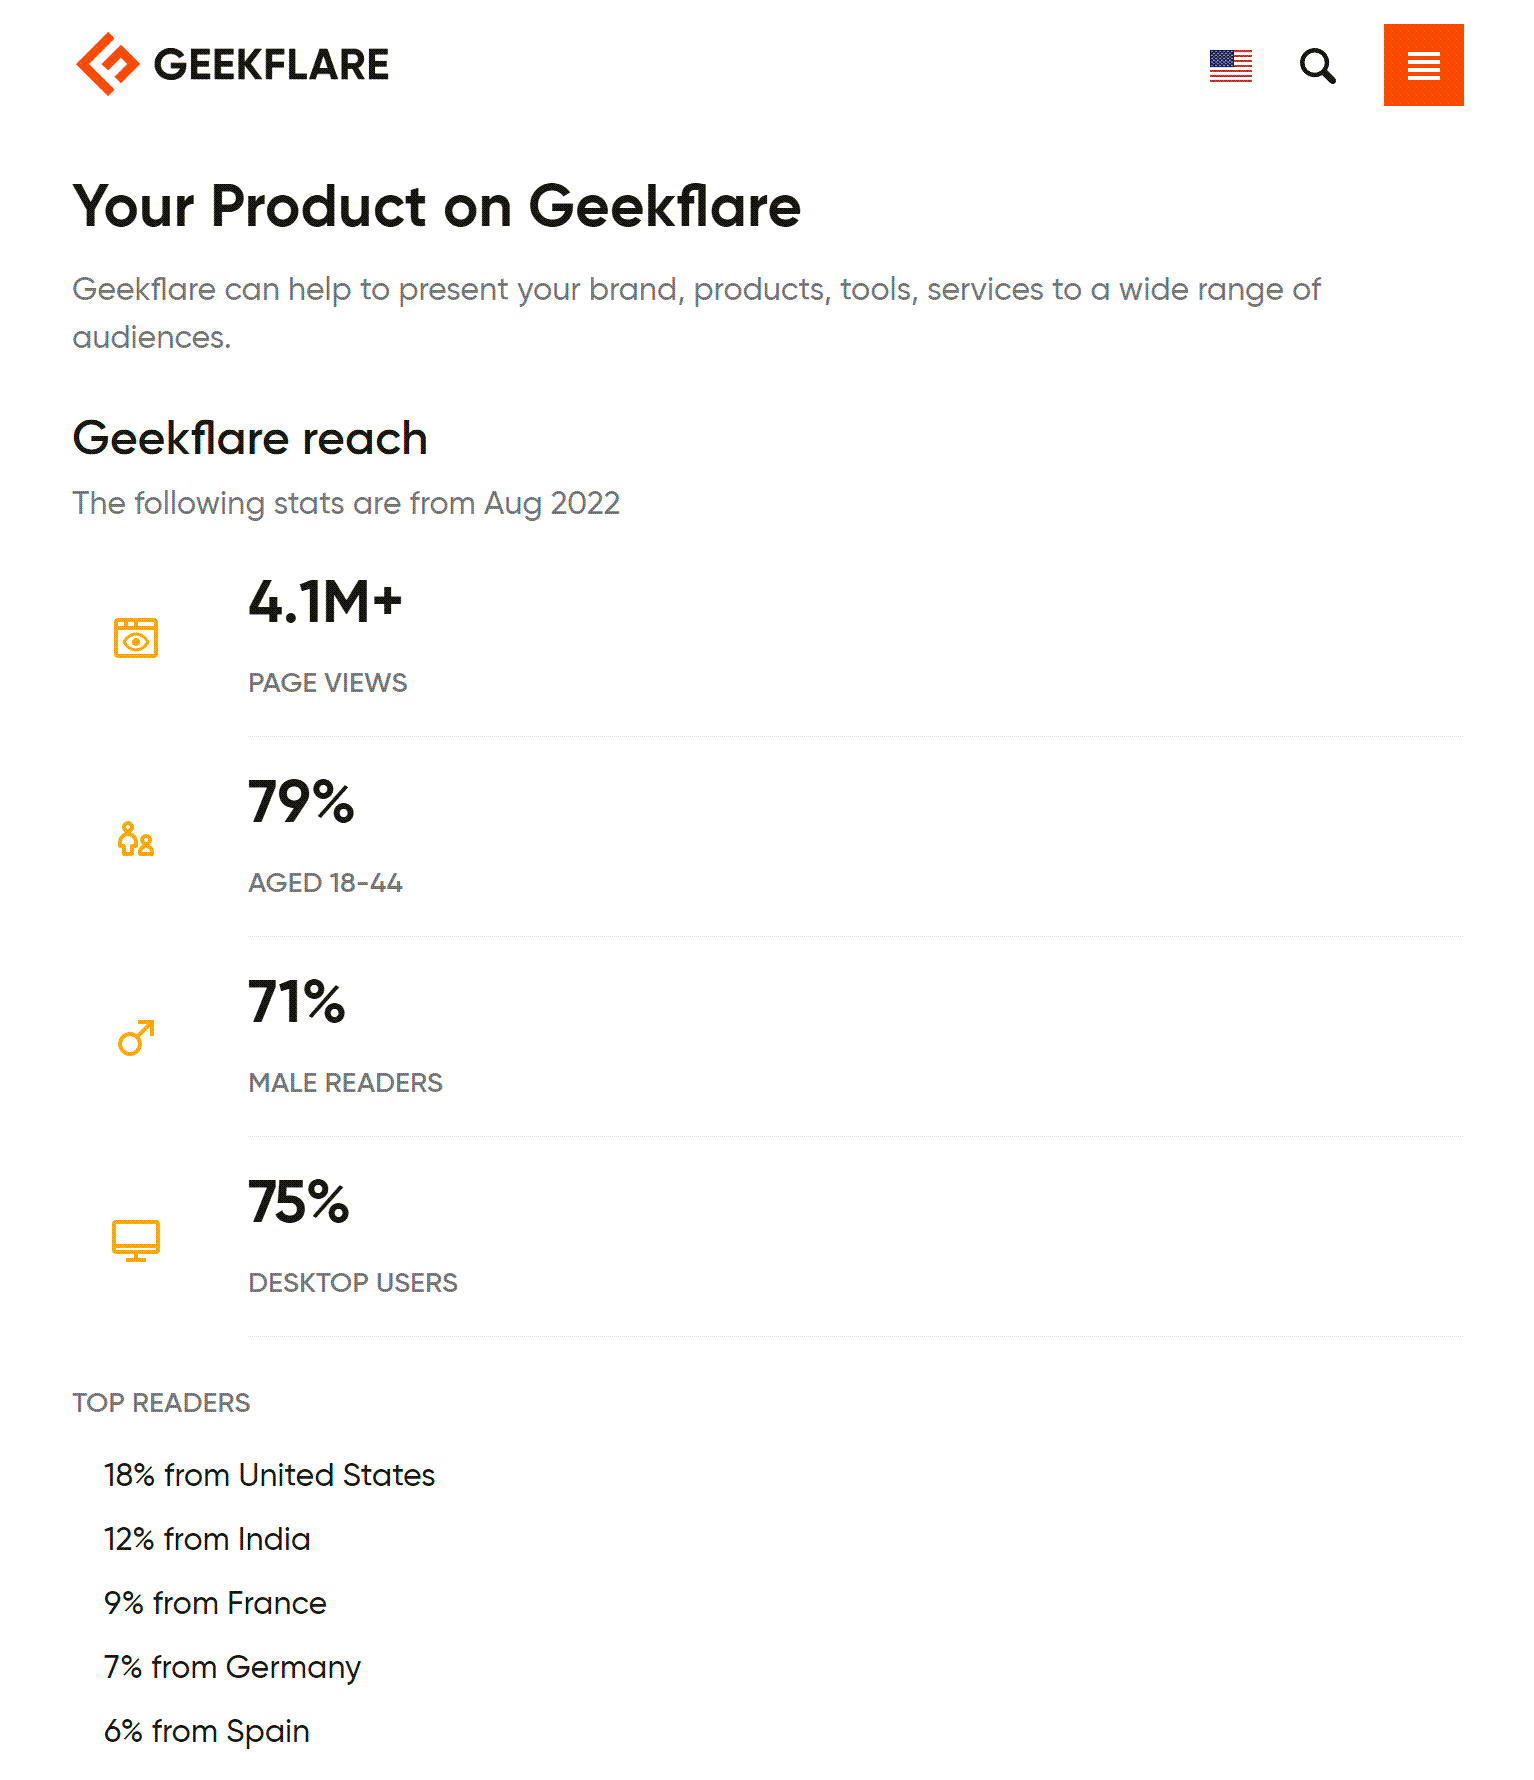 Geekflare attracting advertisers by publishing KPIs